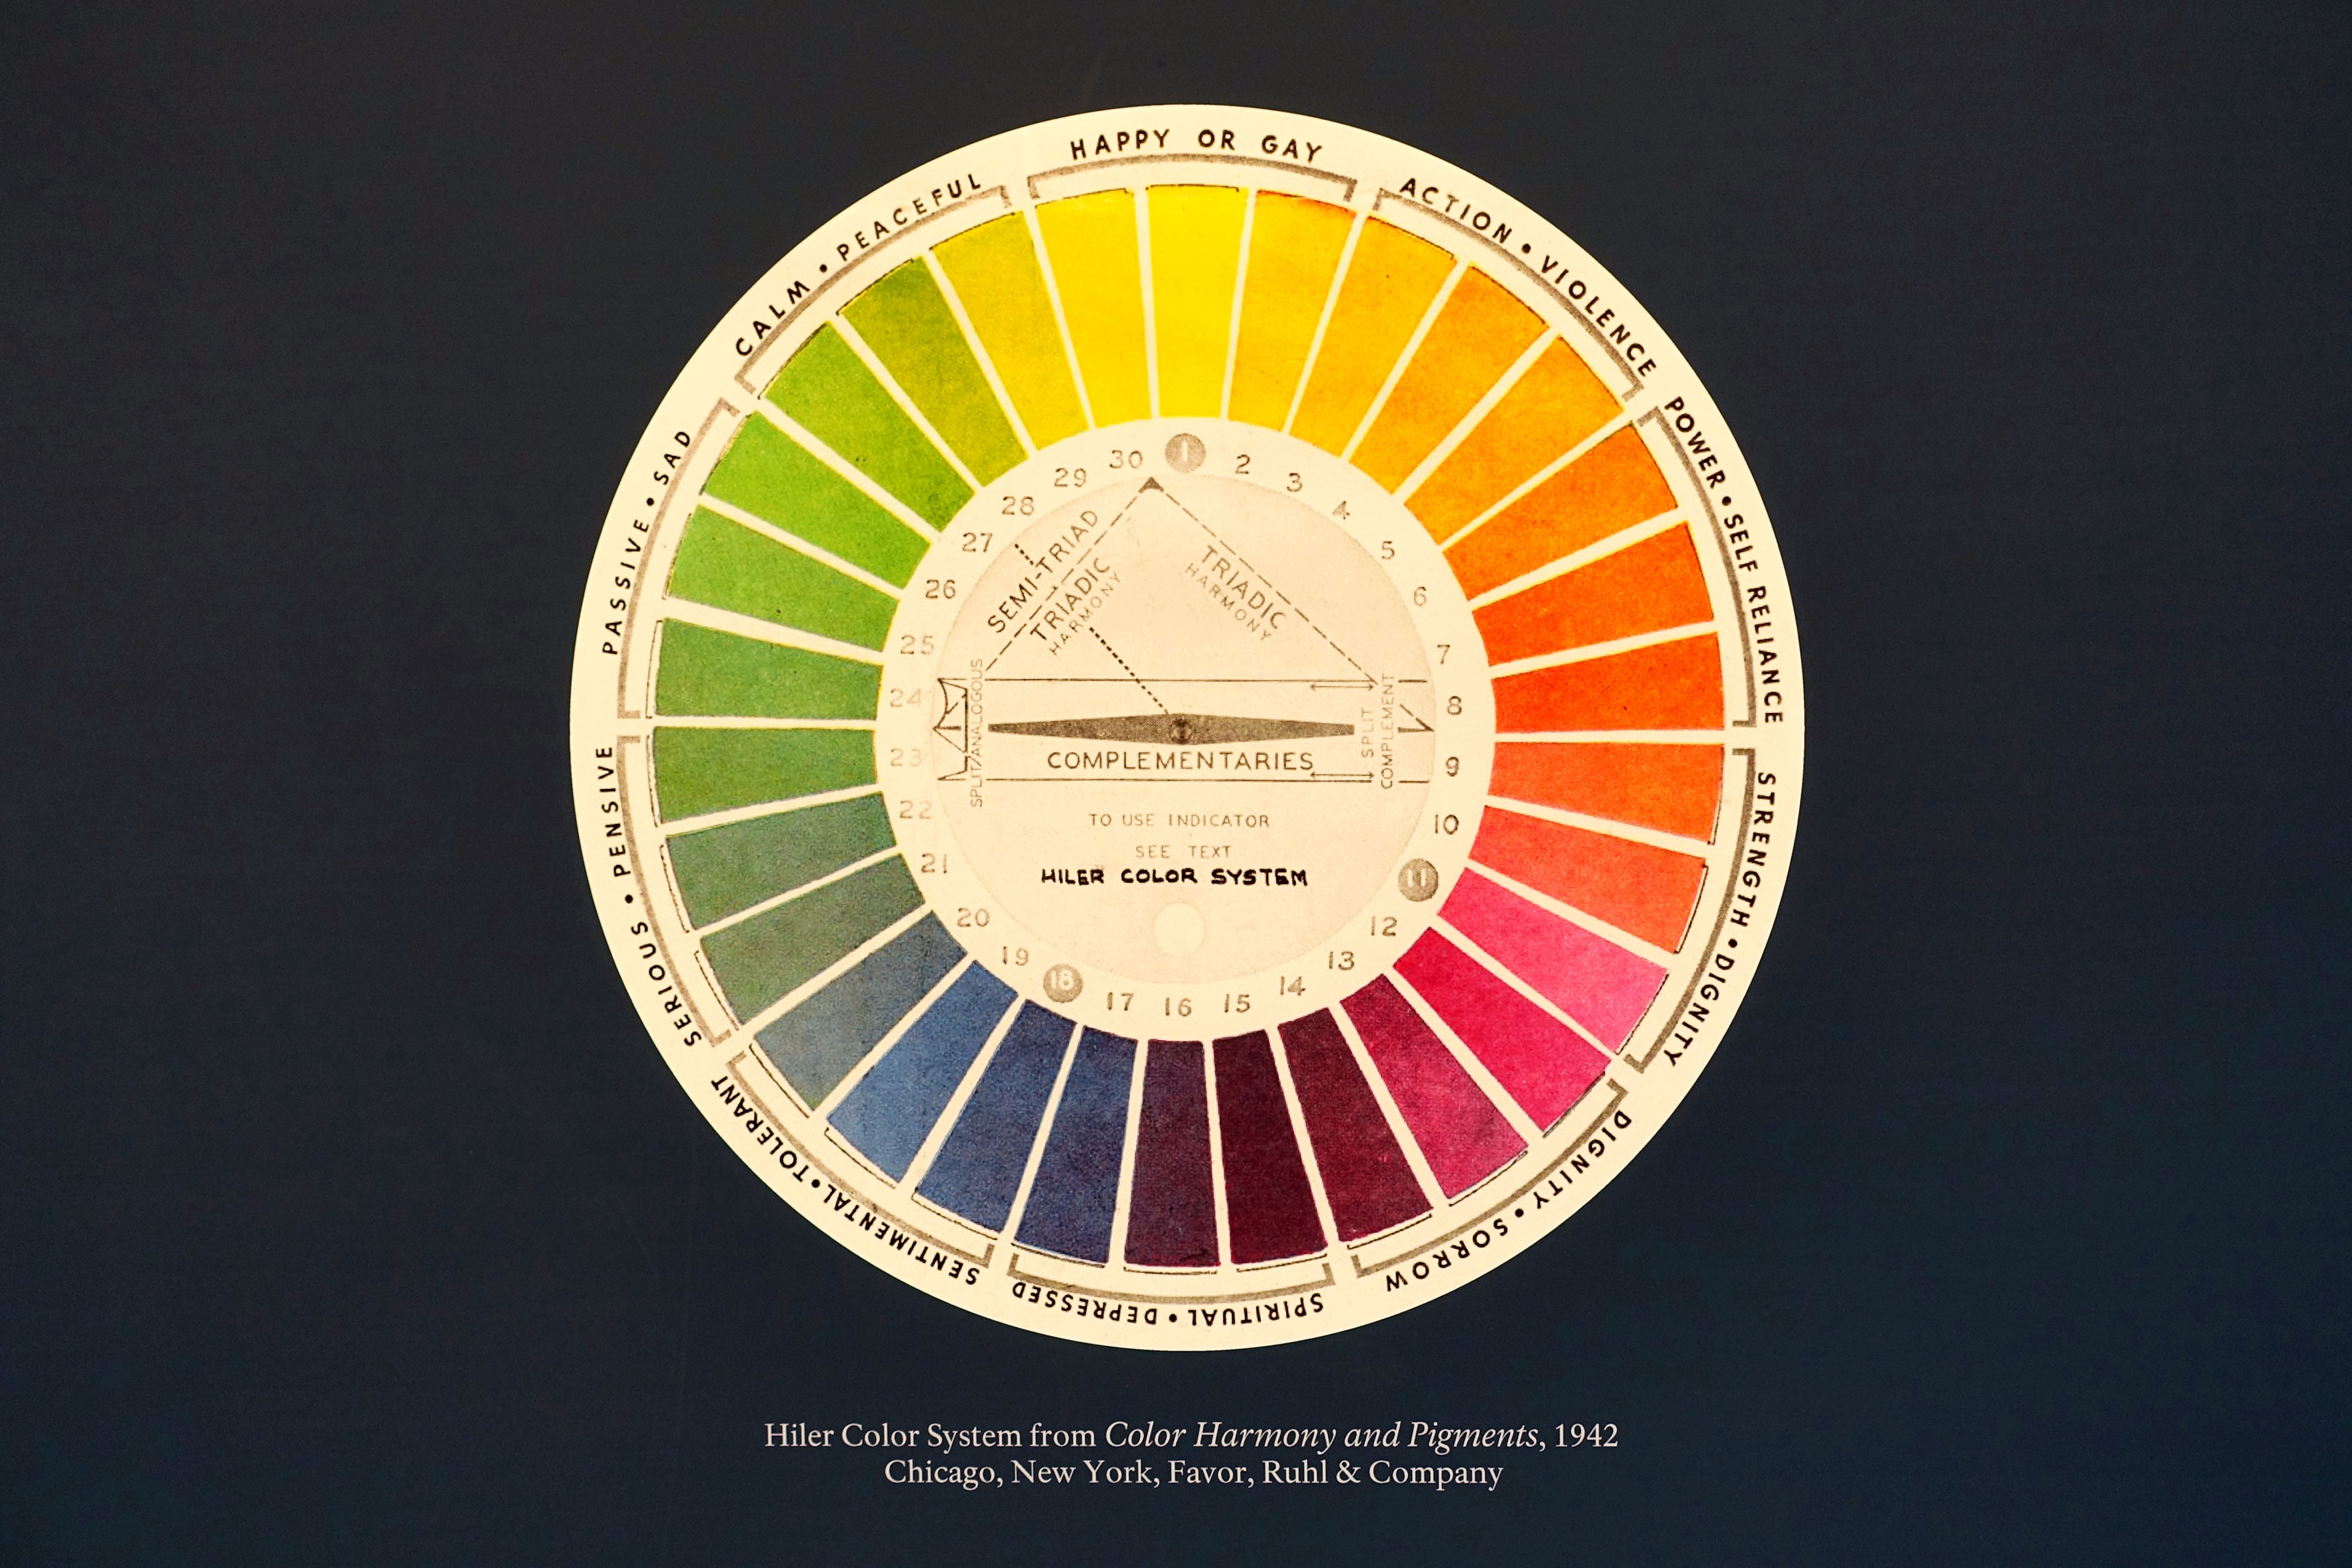 color theory, color wheel, colour theory, color wheel poster